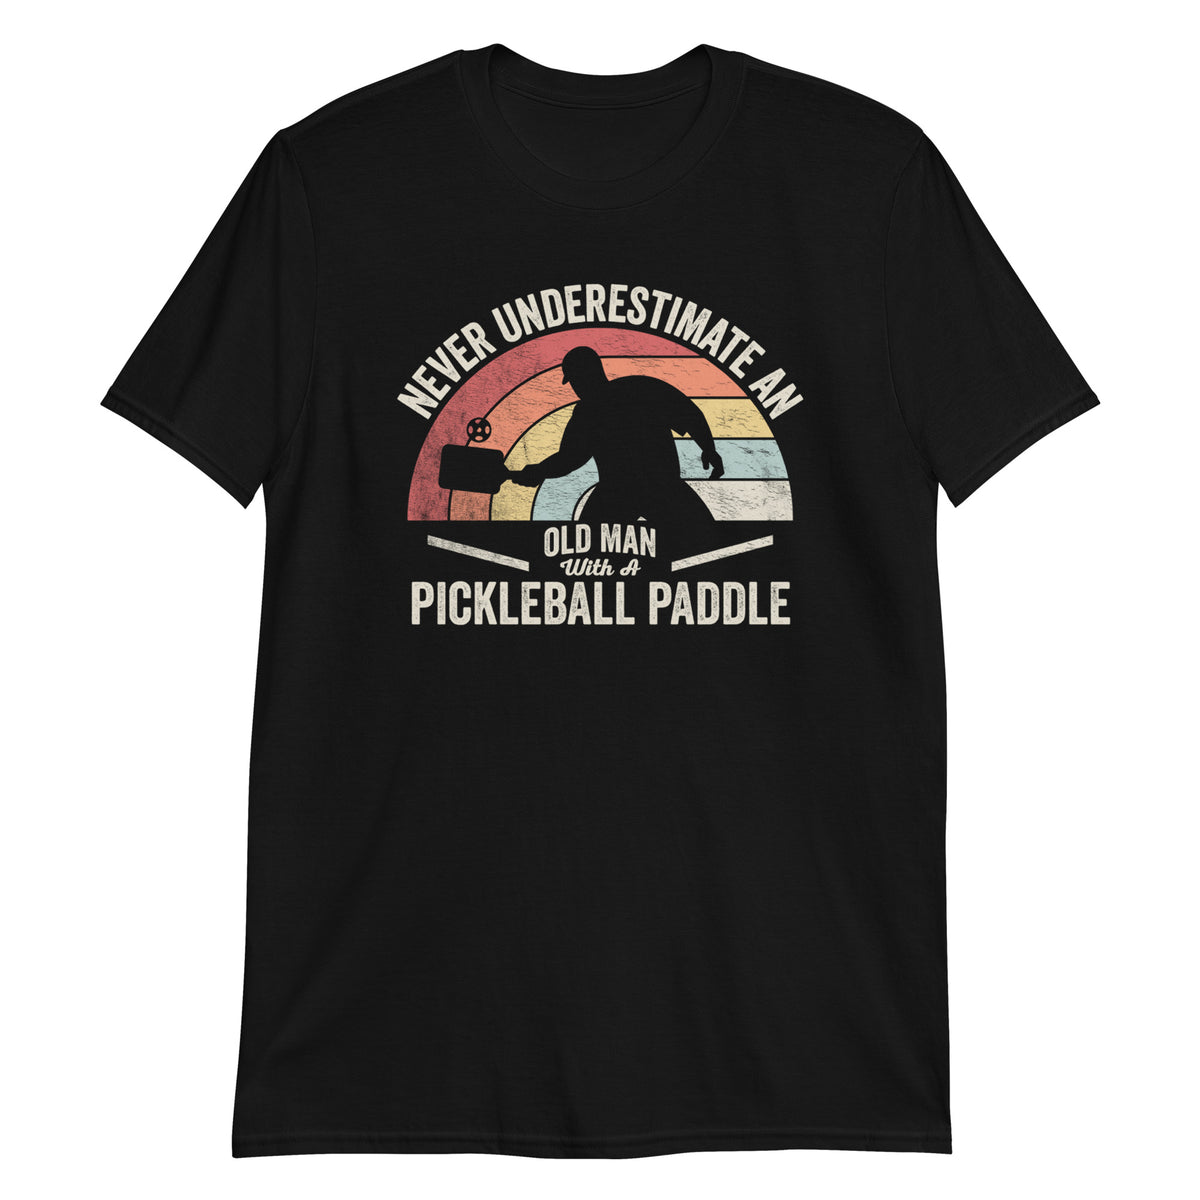 Never Underestimate an Old Man With a Pickleball Paddle T-Shirt